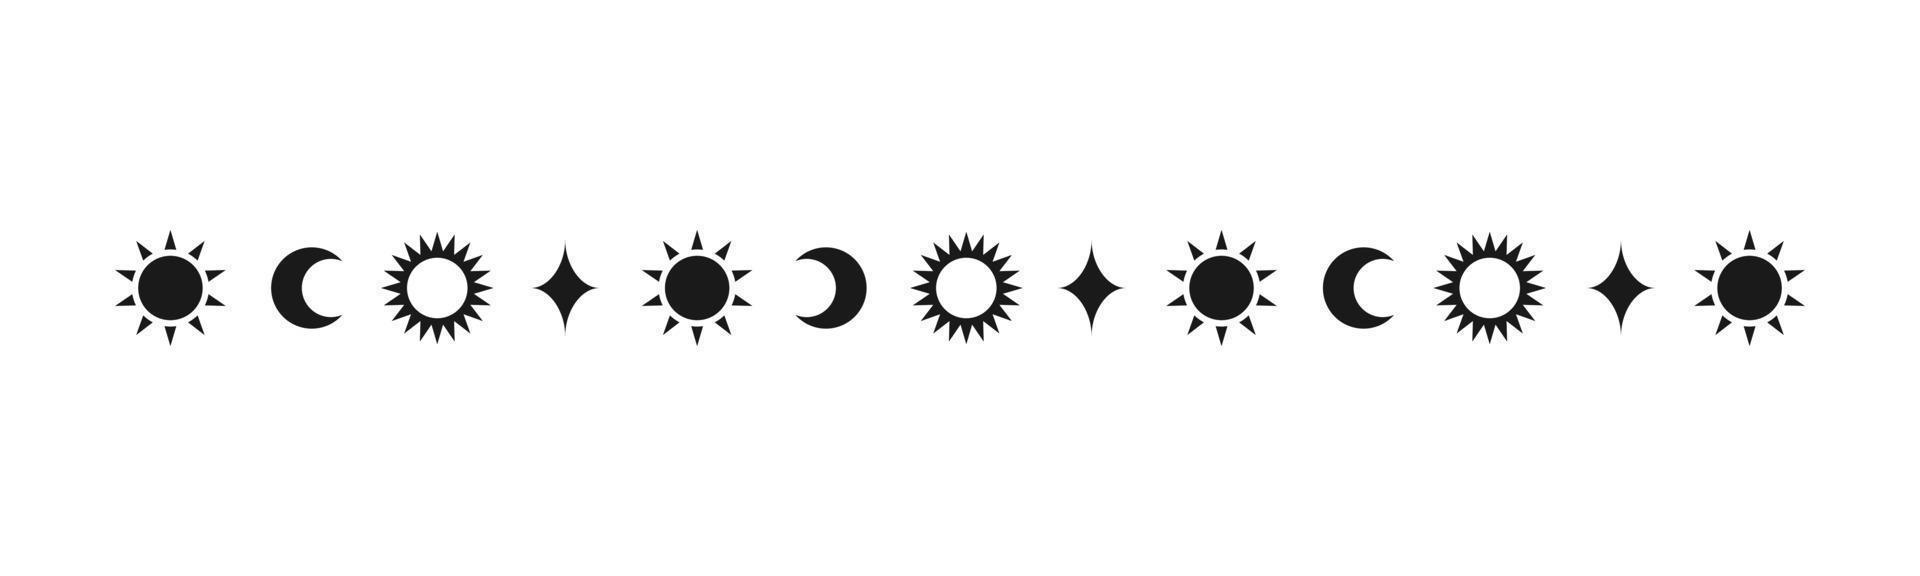 Celestial mystic separator with sun, stars, moon phases, crescents. Ornate boho magical divider decorative element vector